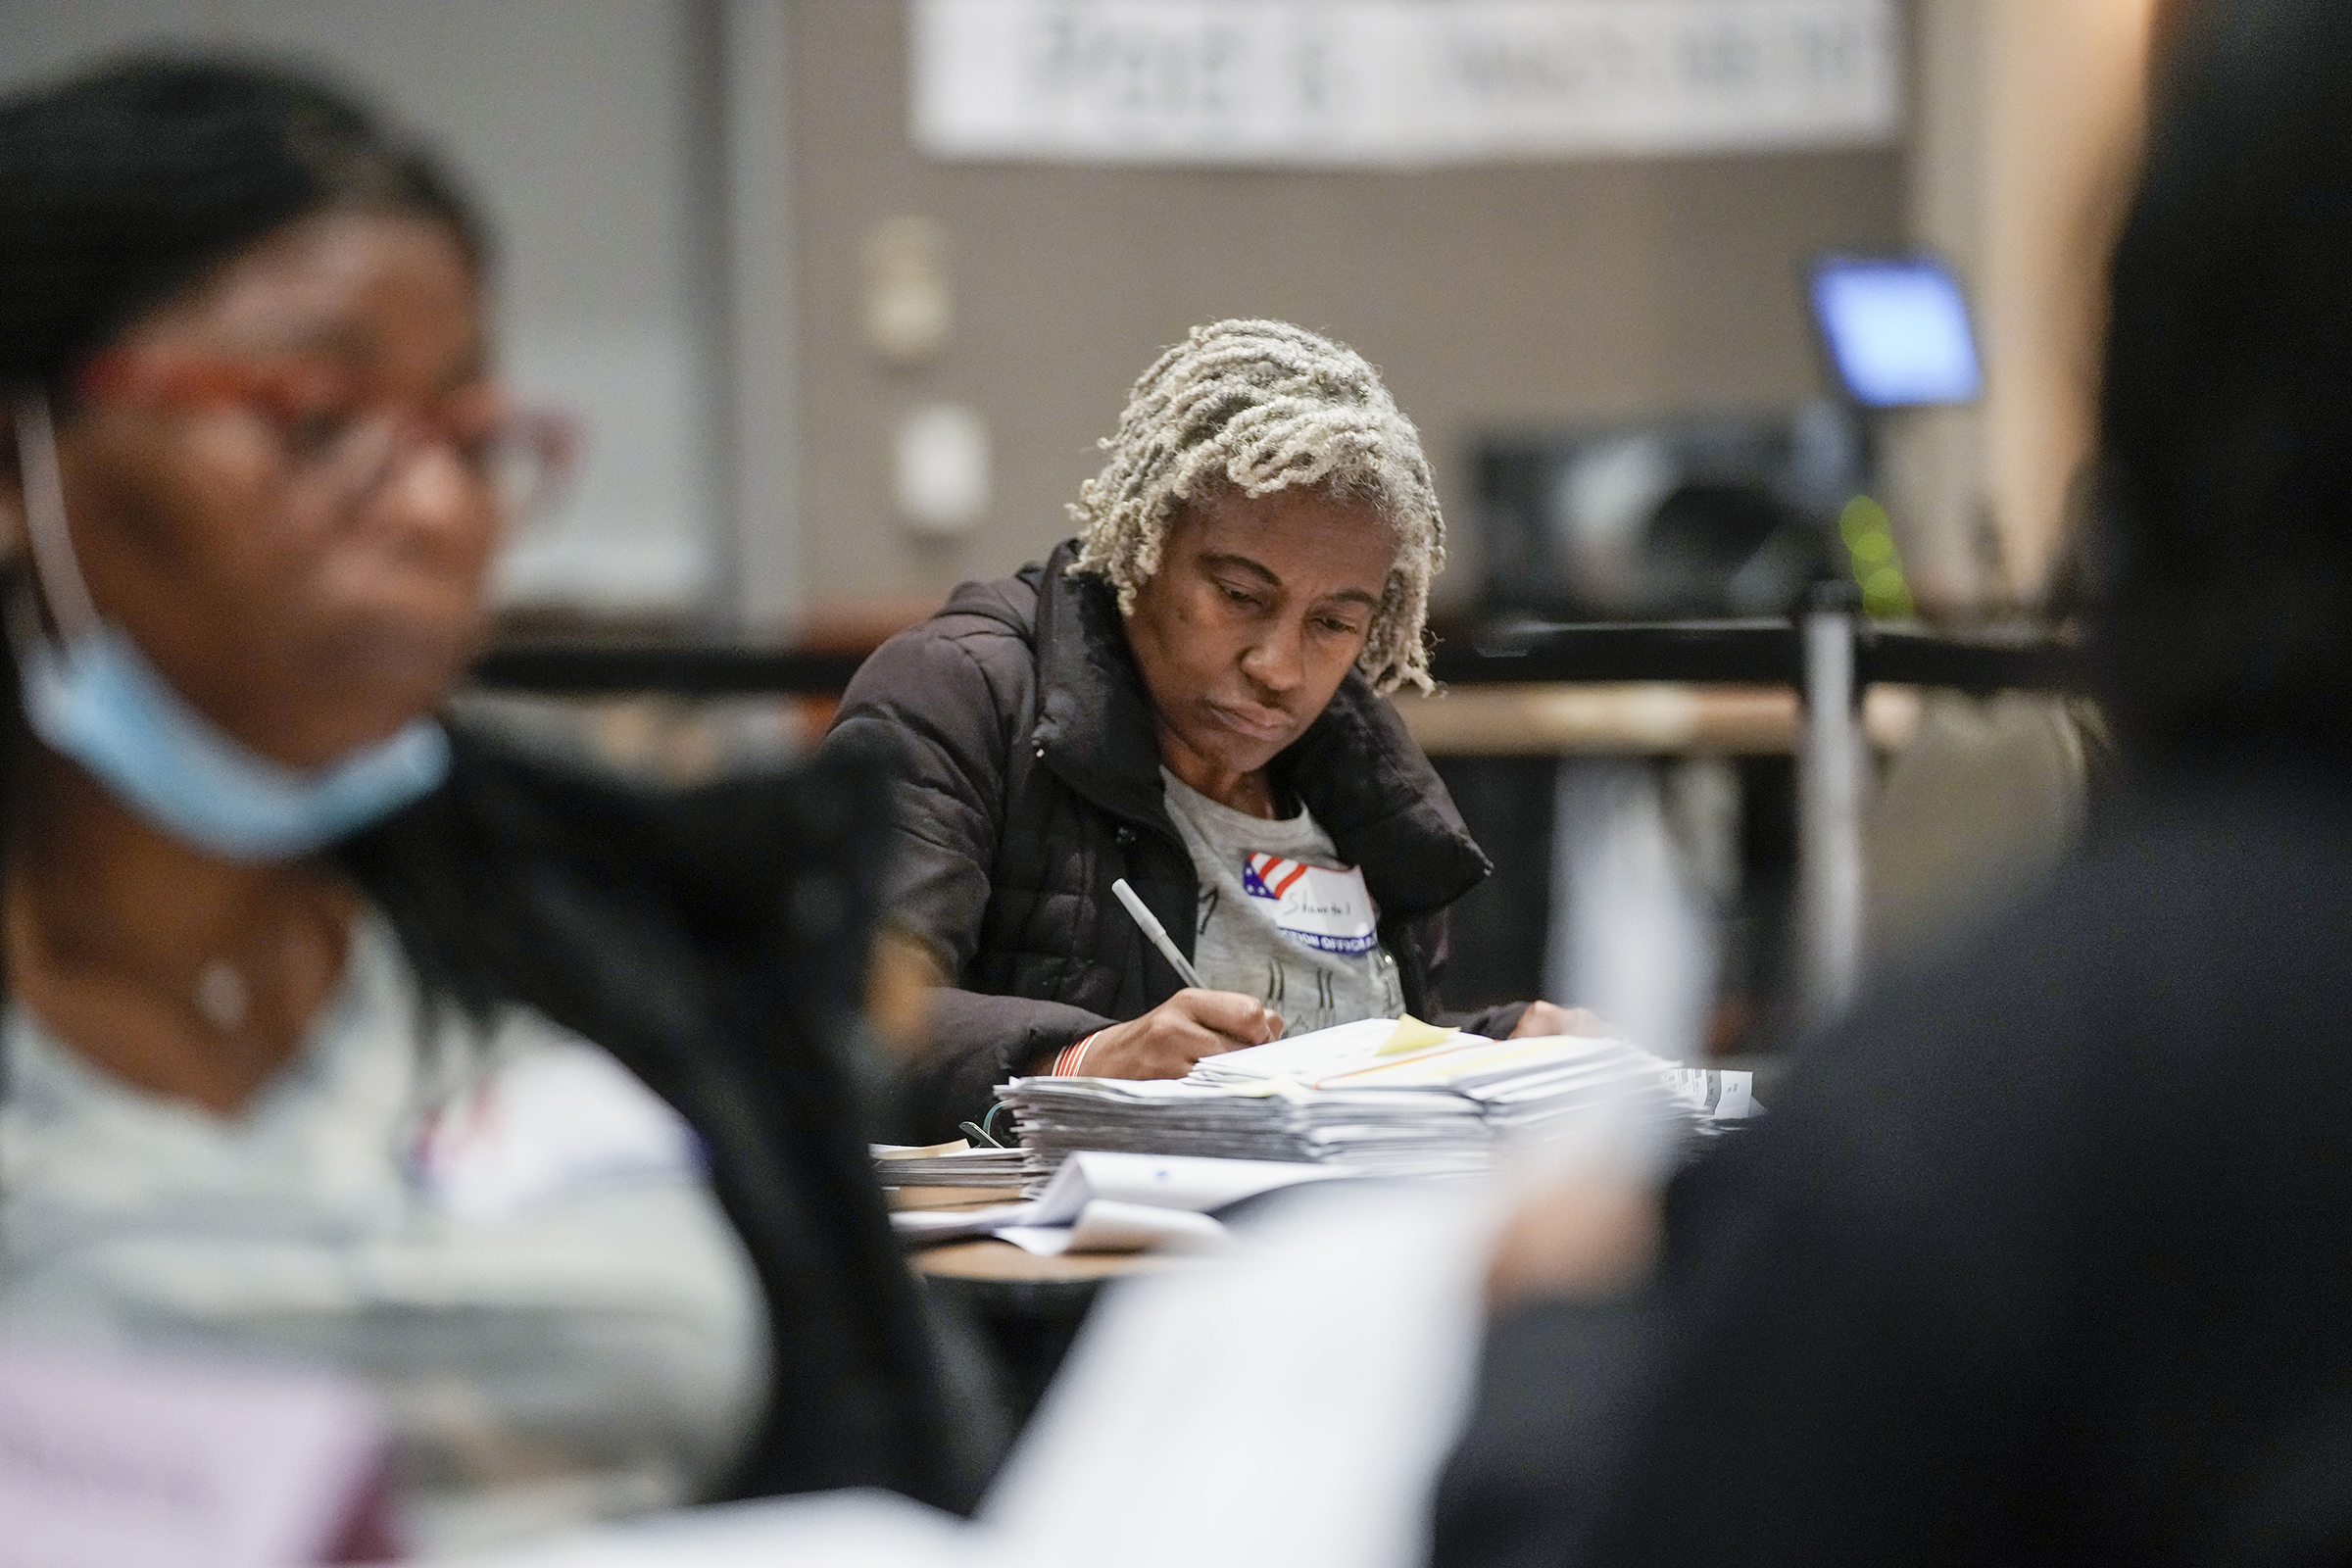 Workers count absentee ballots at the Wisconsin Center for the midterm election